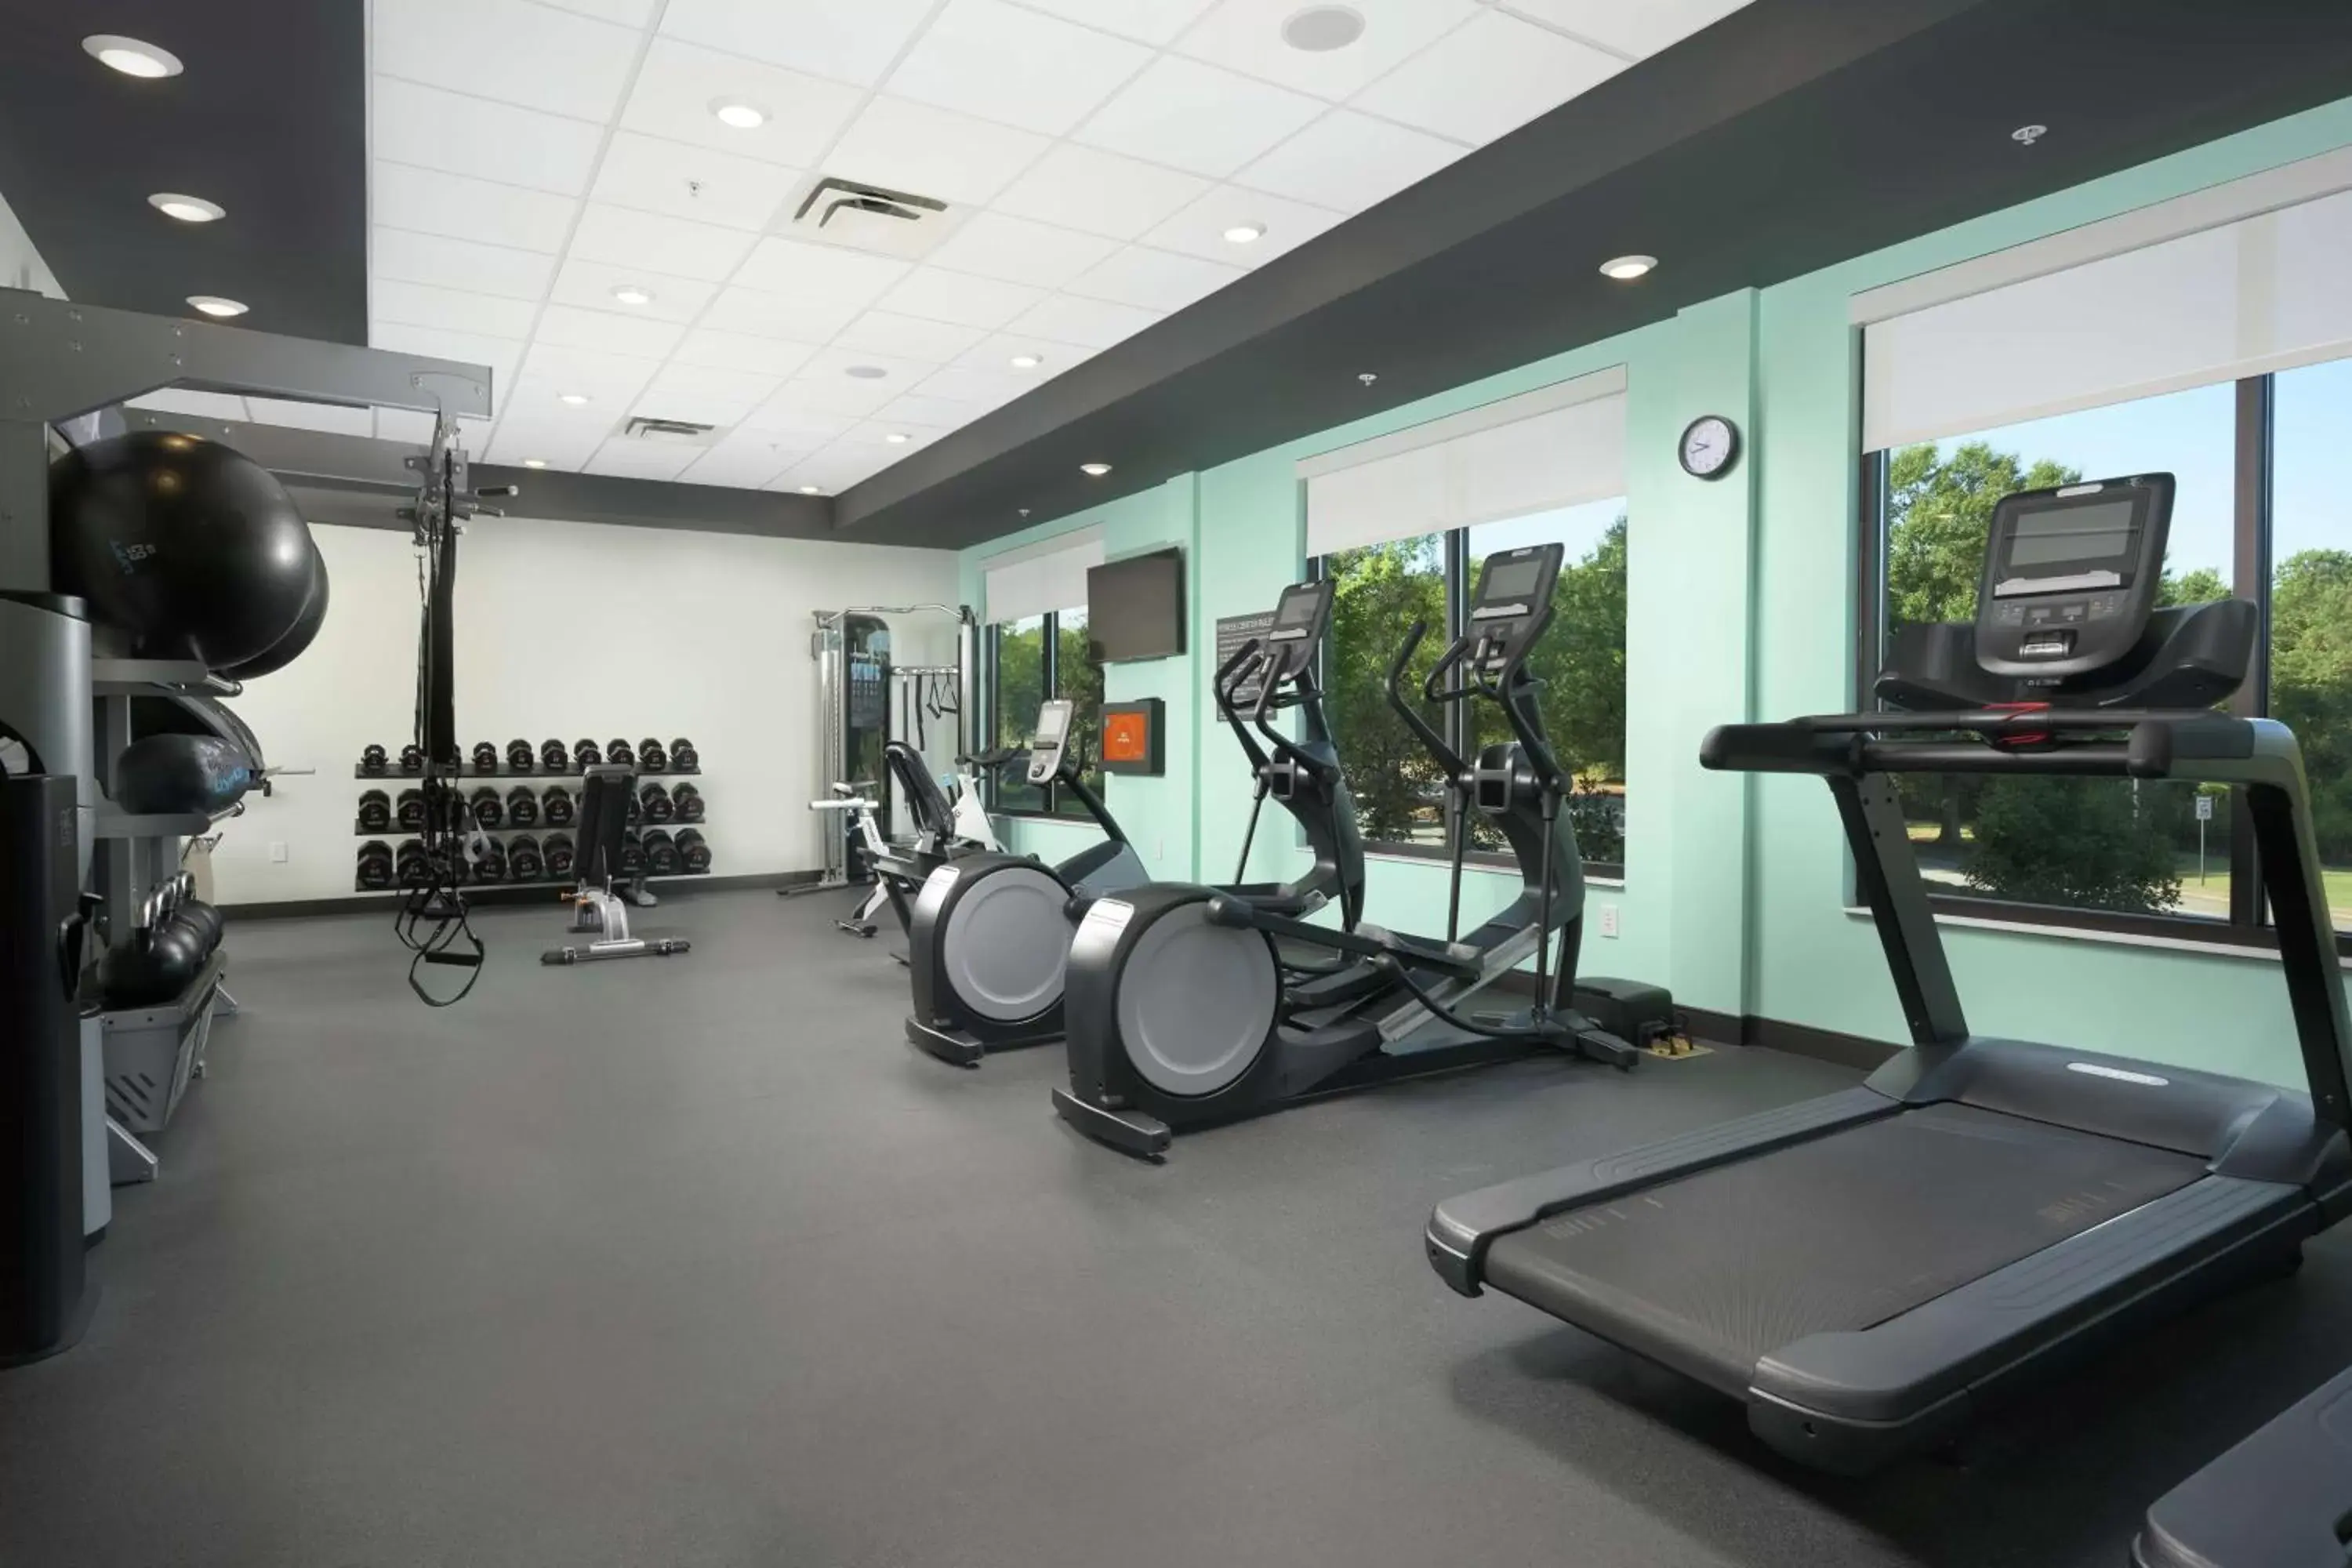 Fitness centre/facilities, Fitness Center/Facilities in Tru By Hilton Kennesaw, Ga